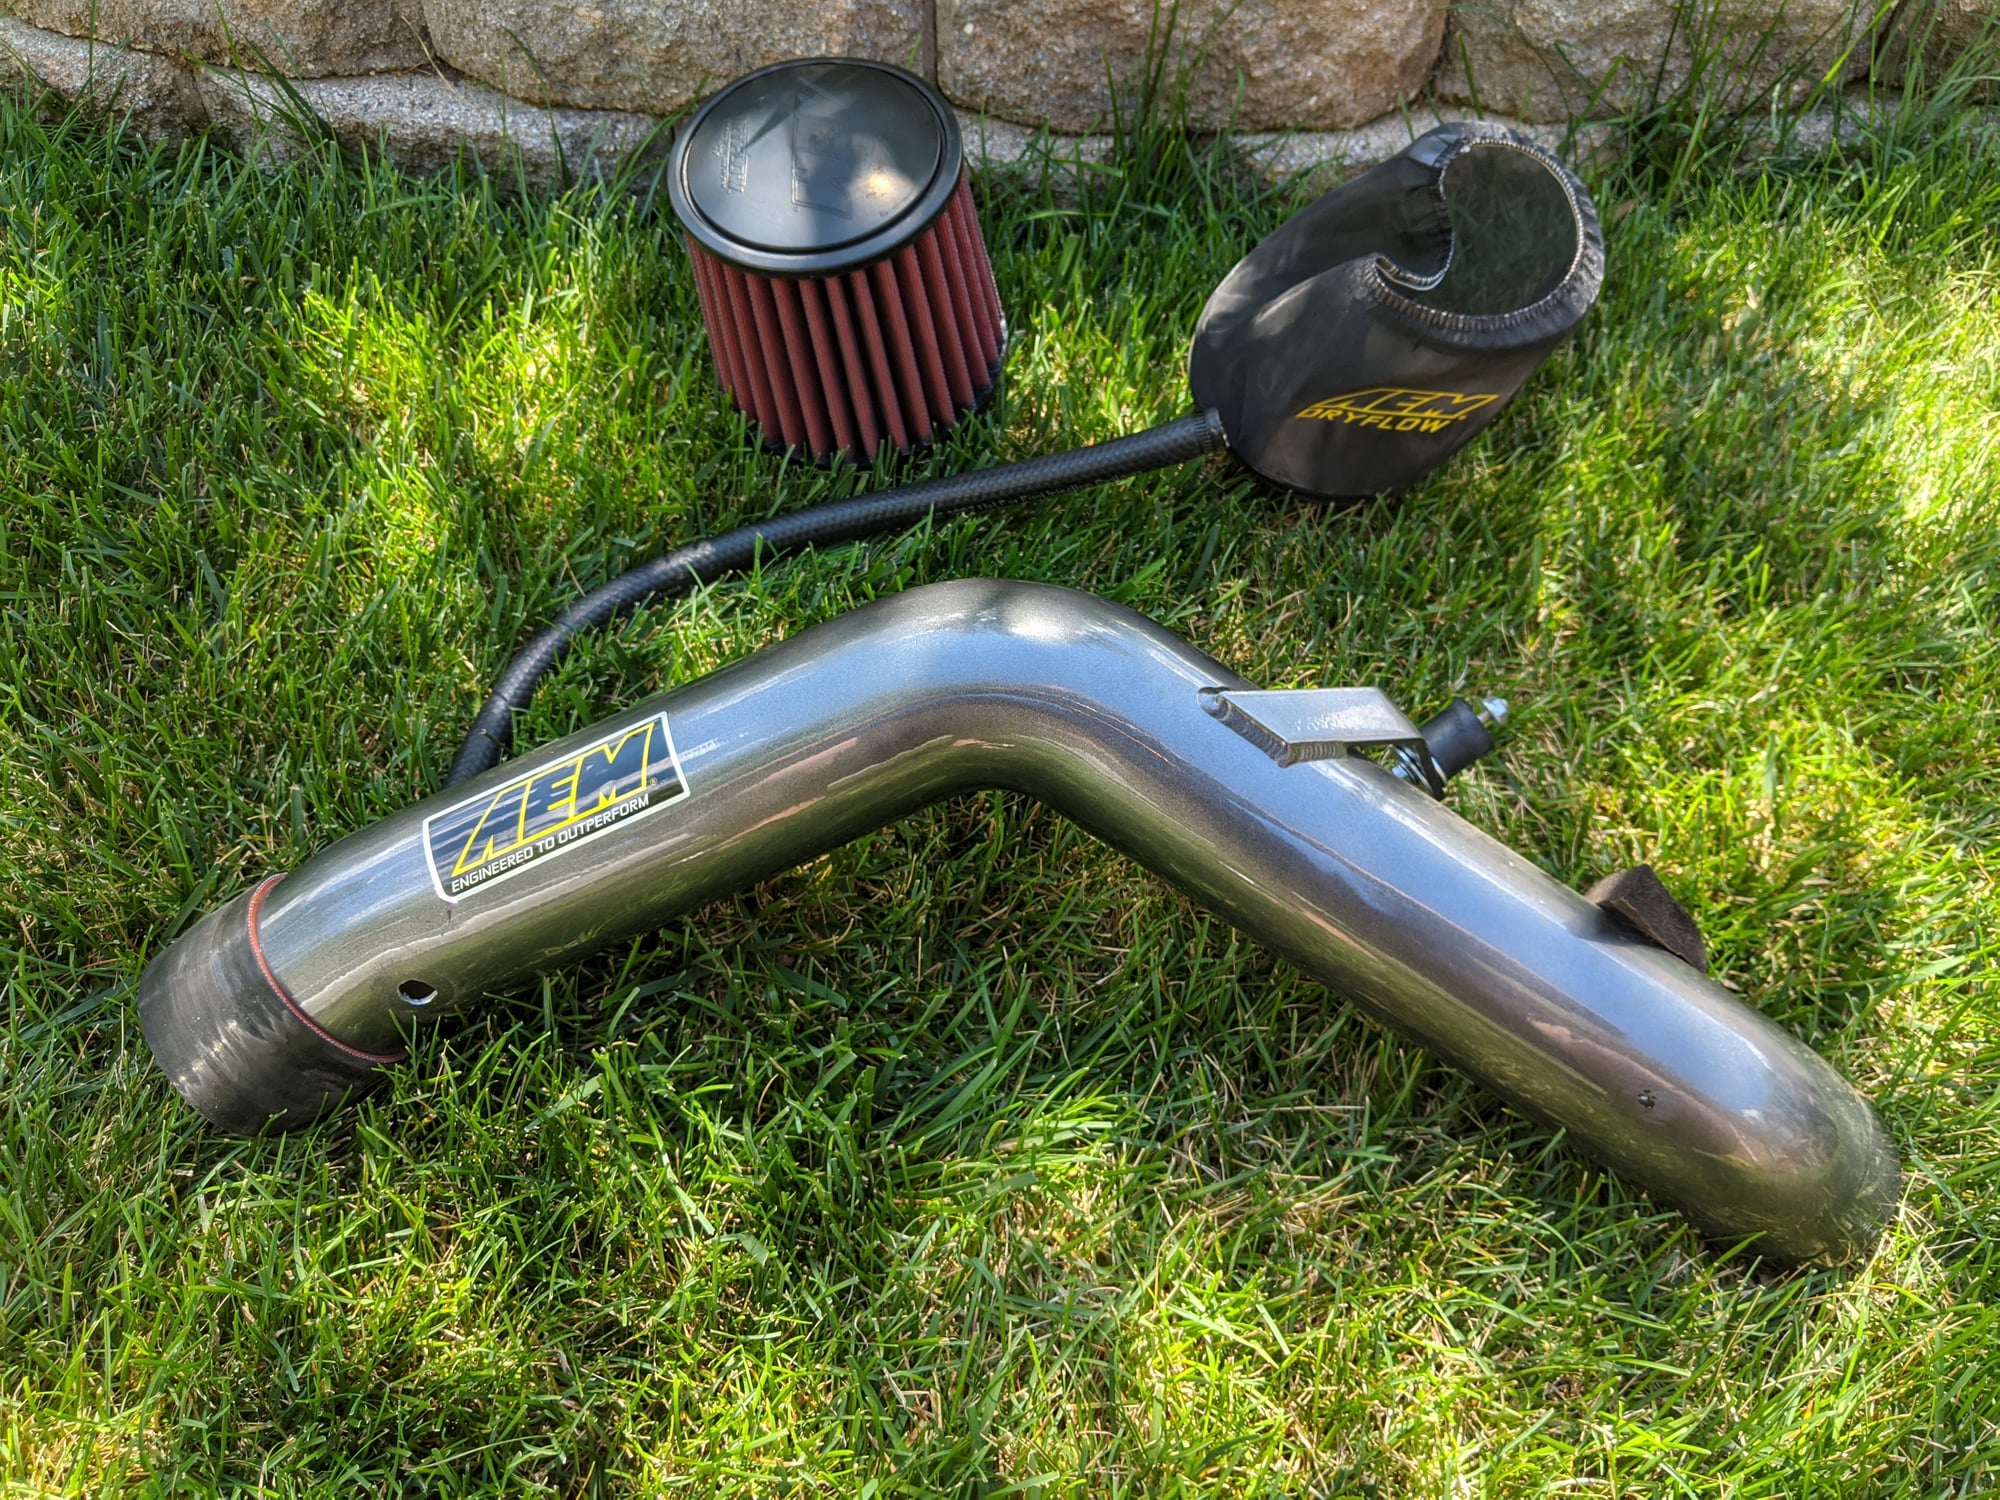 Engine - Intake/Fuel - SOLD: AEM Cold Air Intake System ('04-'08 TL & TL-S) - Used - 2004 to 2008 Acura TL - Chicago, IL 60007, United States